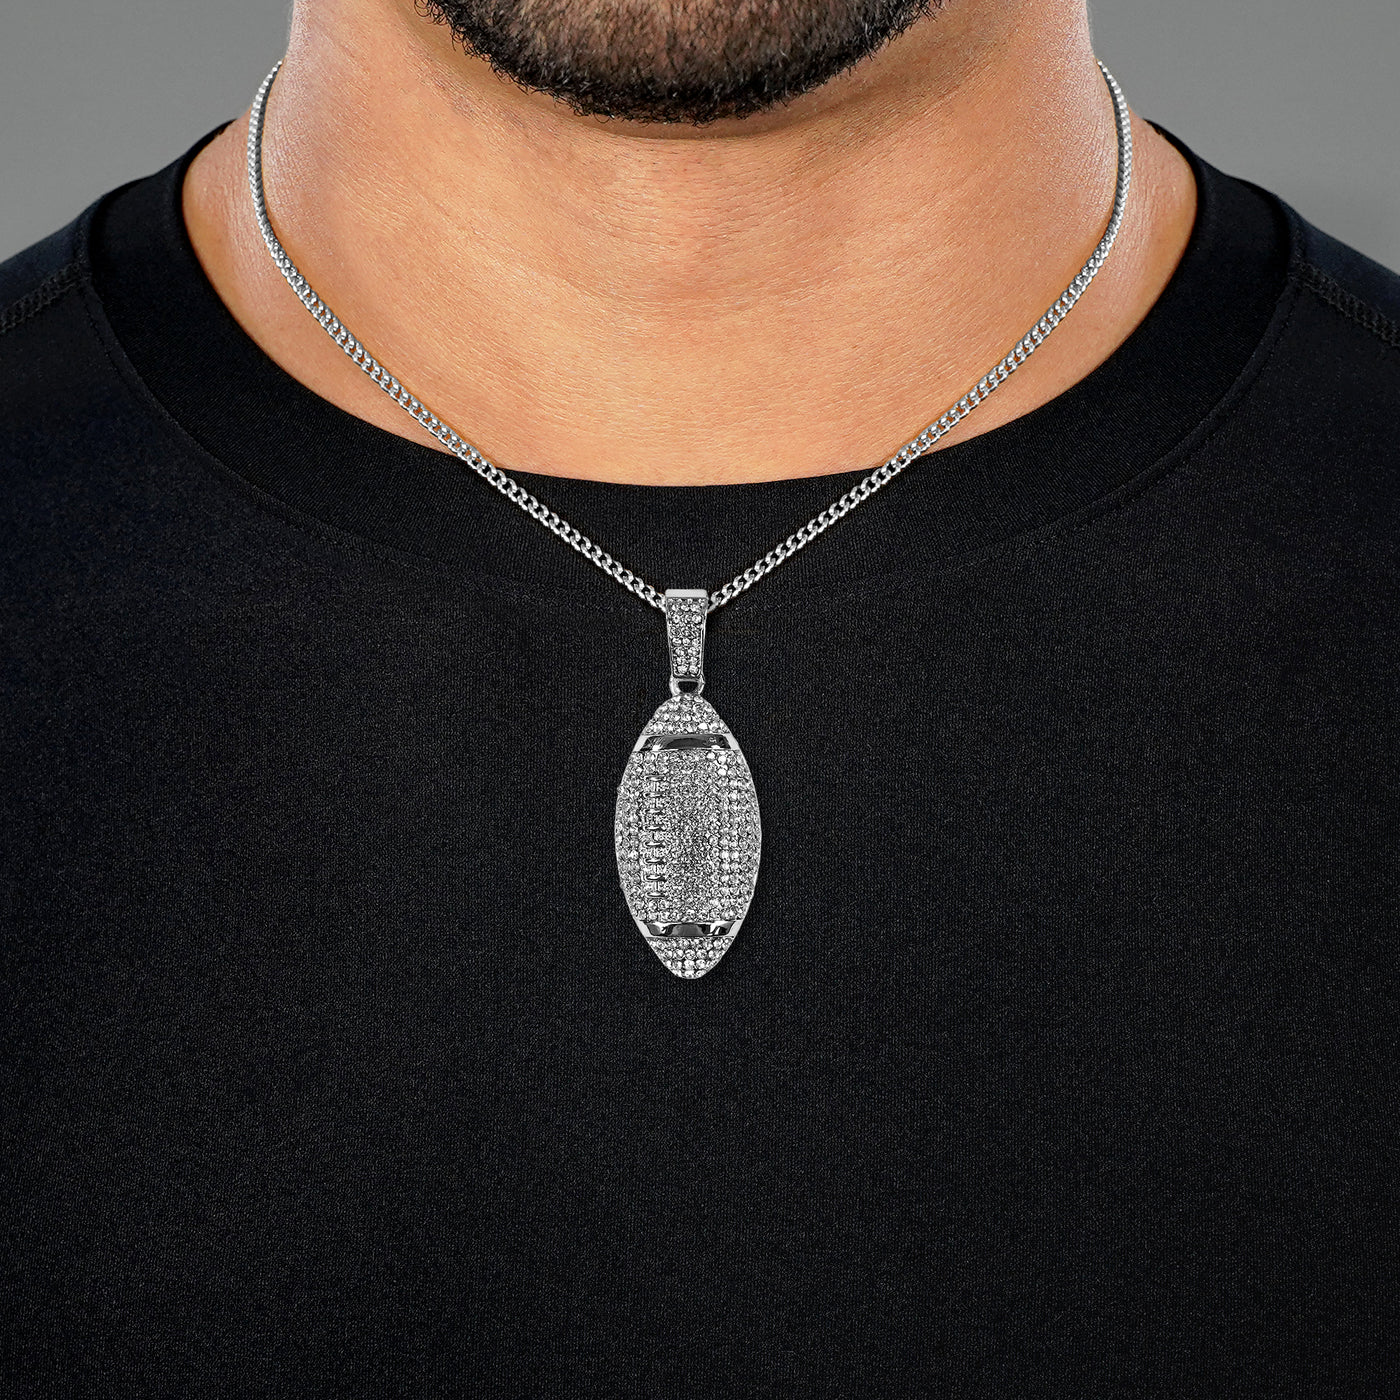 Football 2" Pendant with Chain Necklace - Stainless Steel